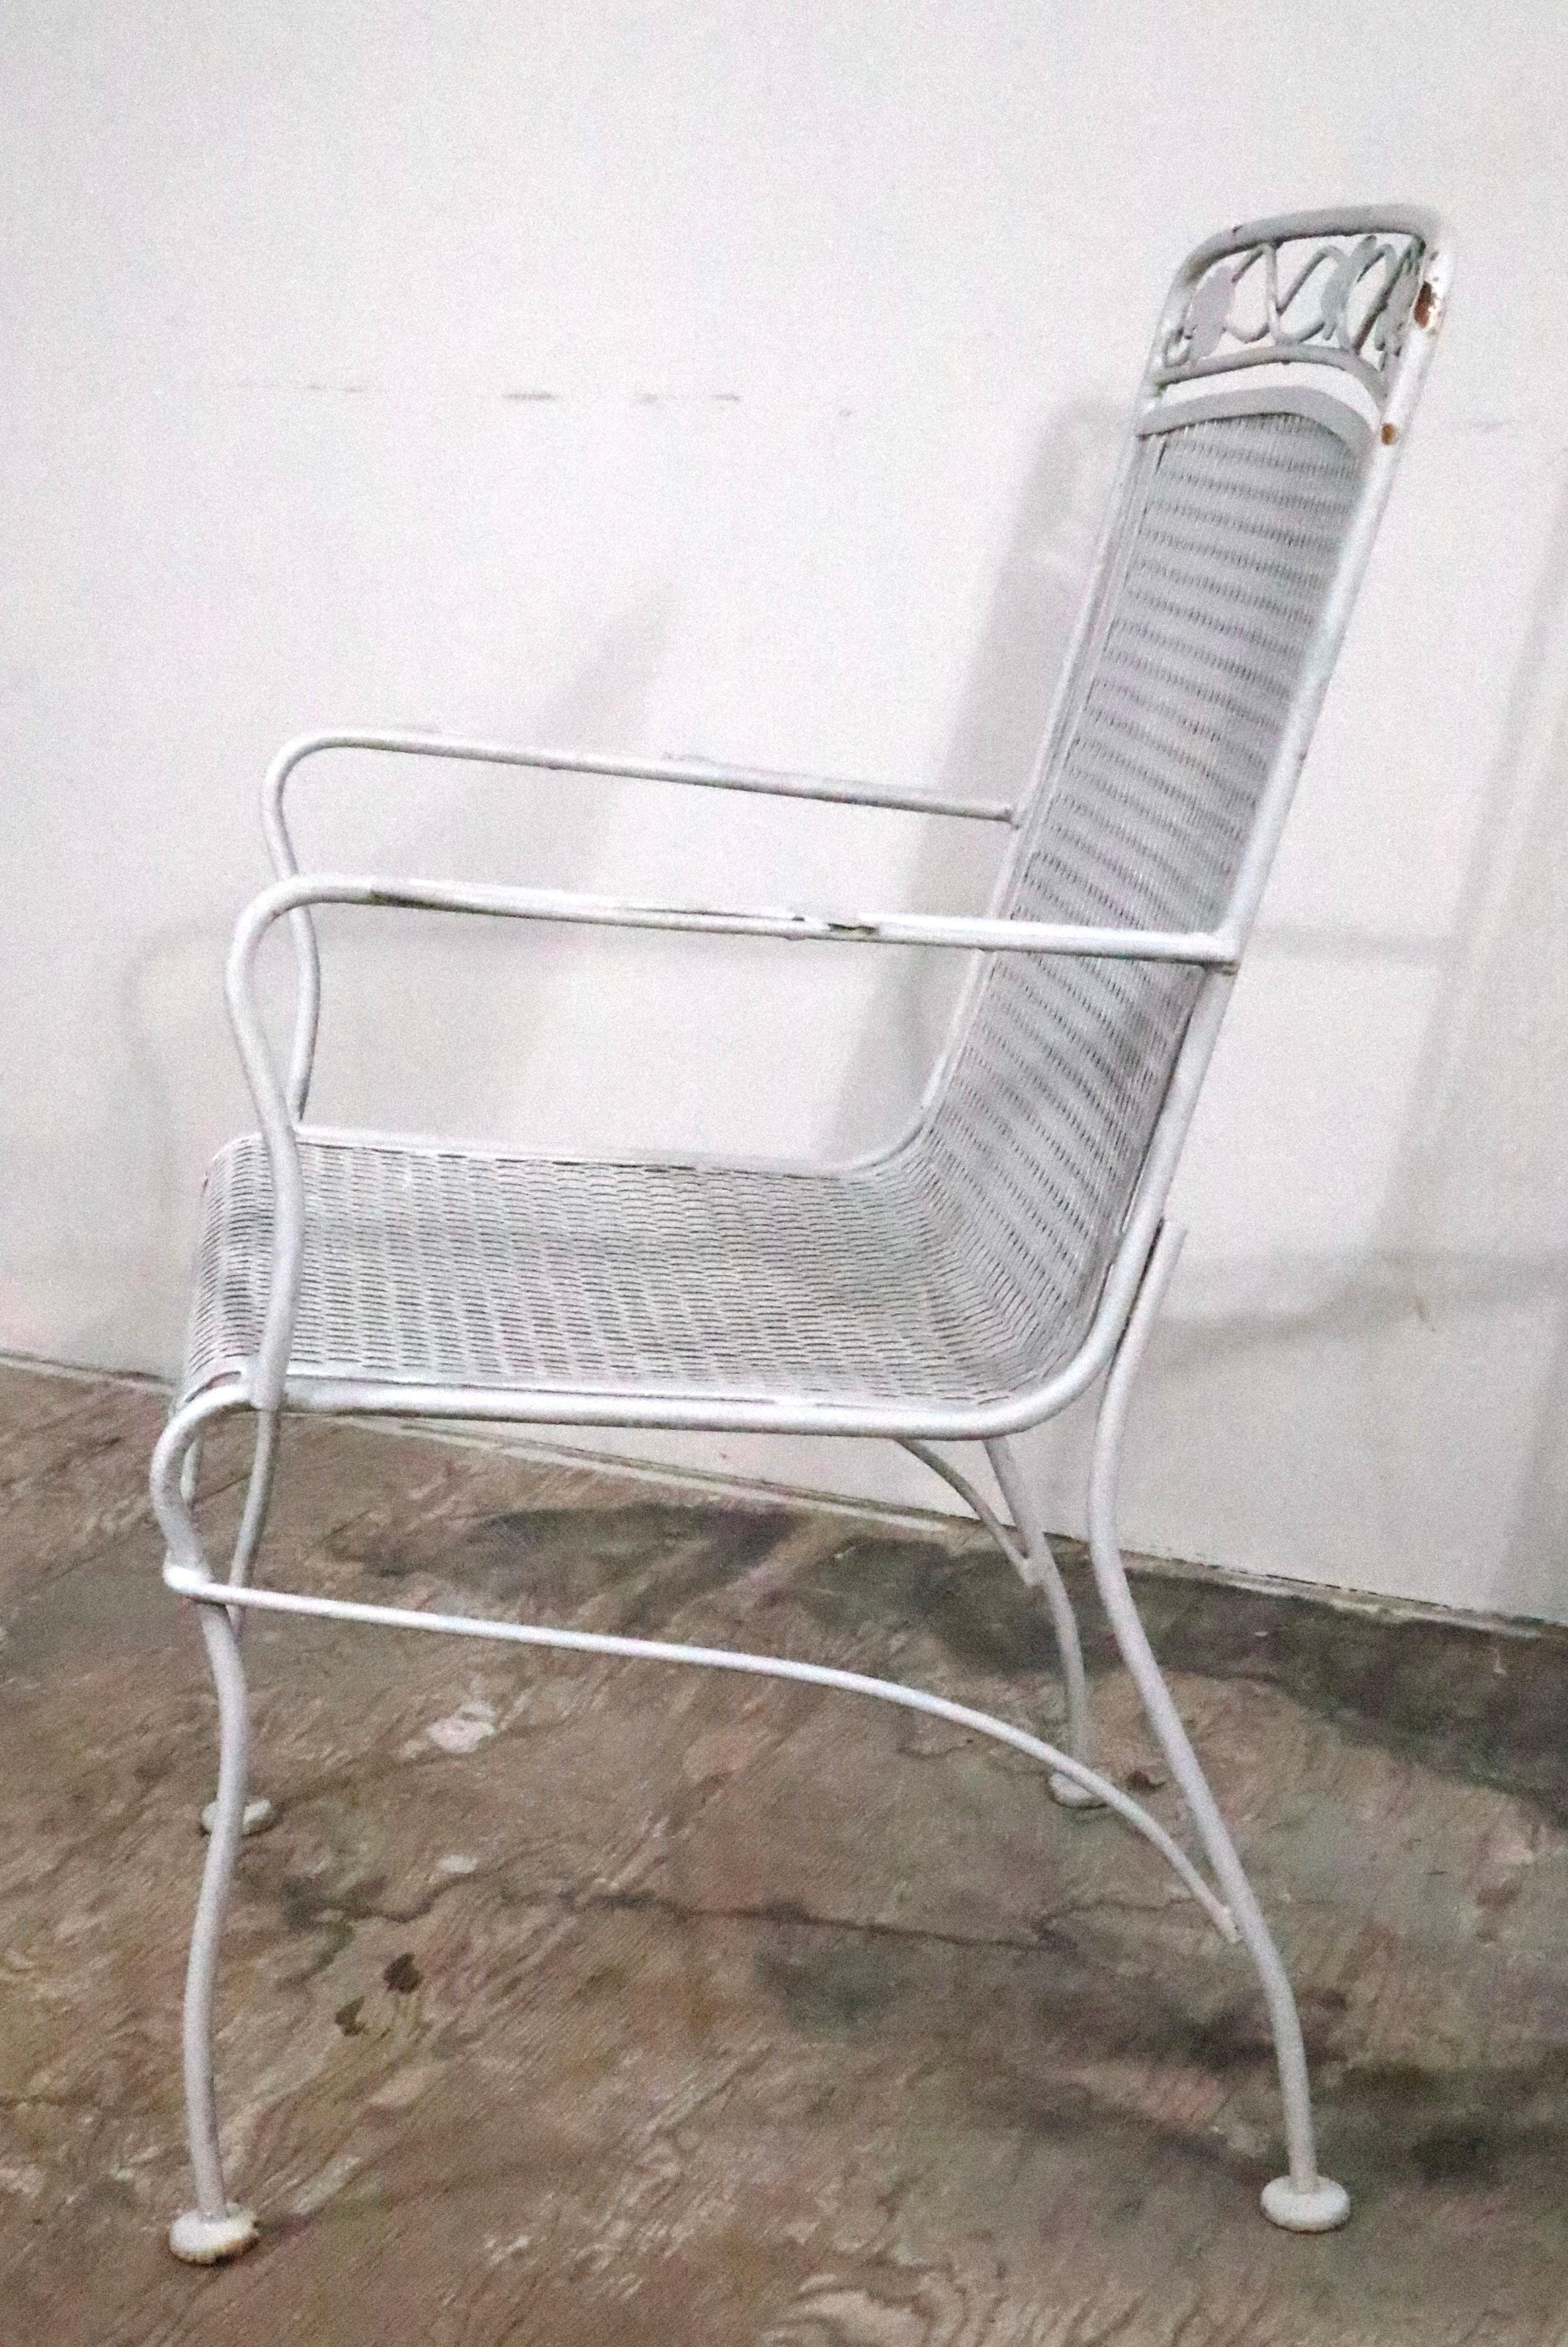 20th Century Pr. Wrought Iron Metal Mesh Garden Patio Poolside Chairs by Woodard c. 1950/70's For Sale